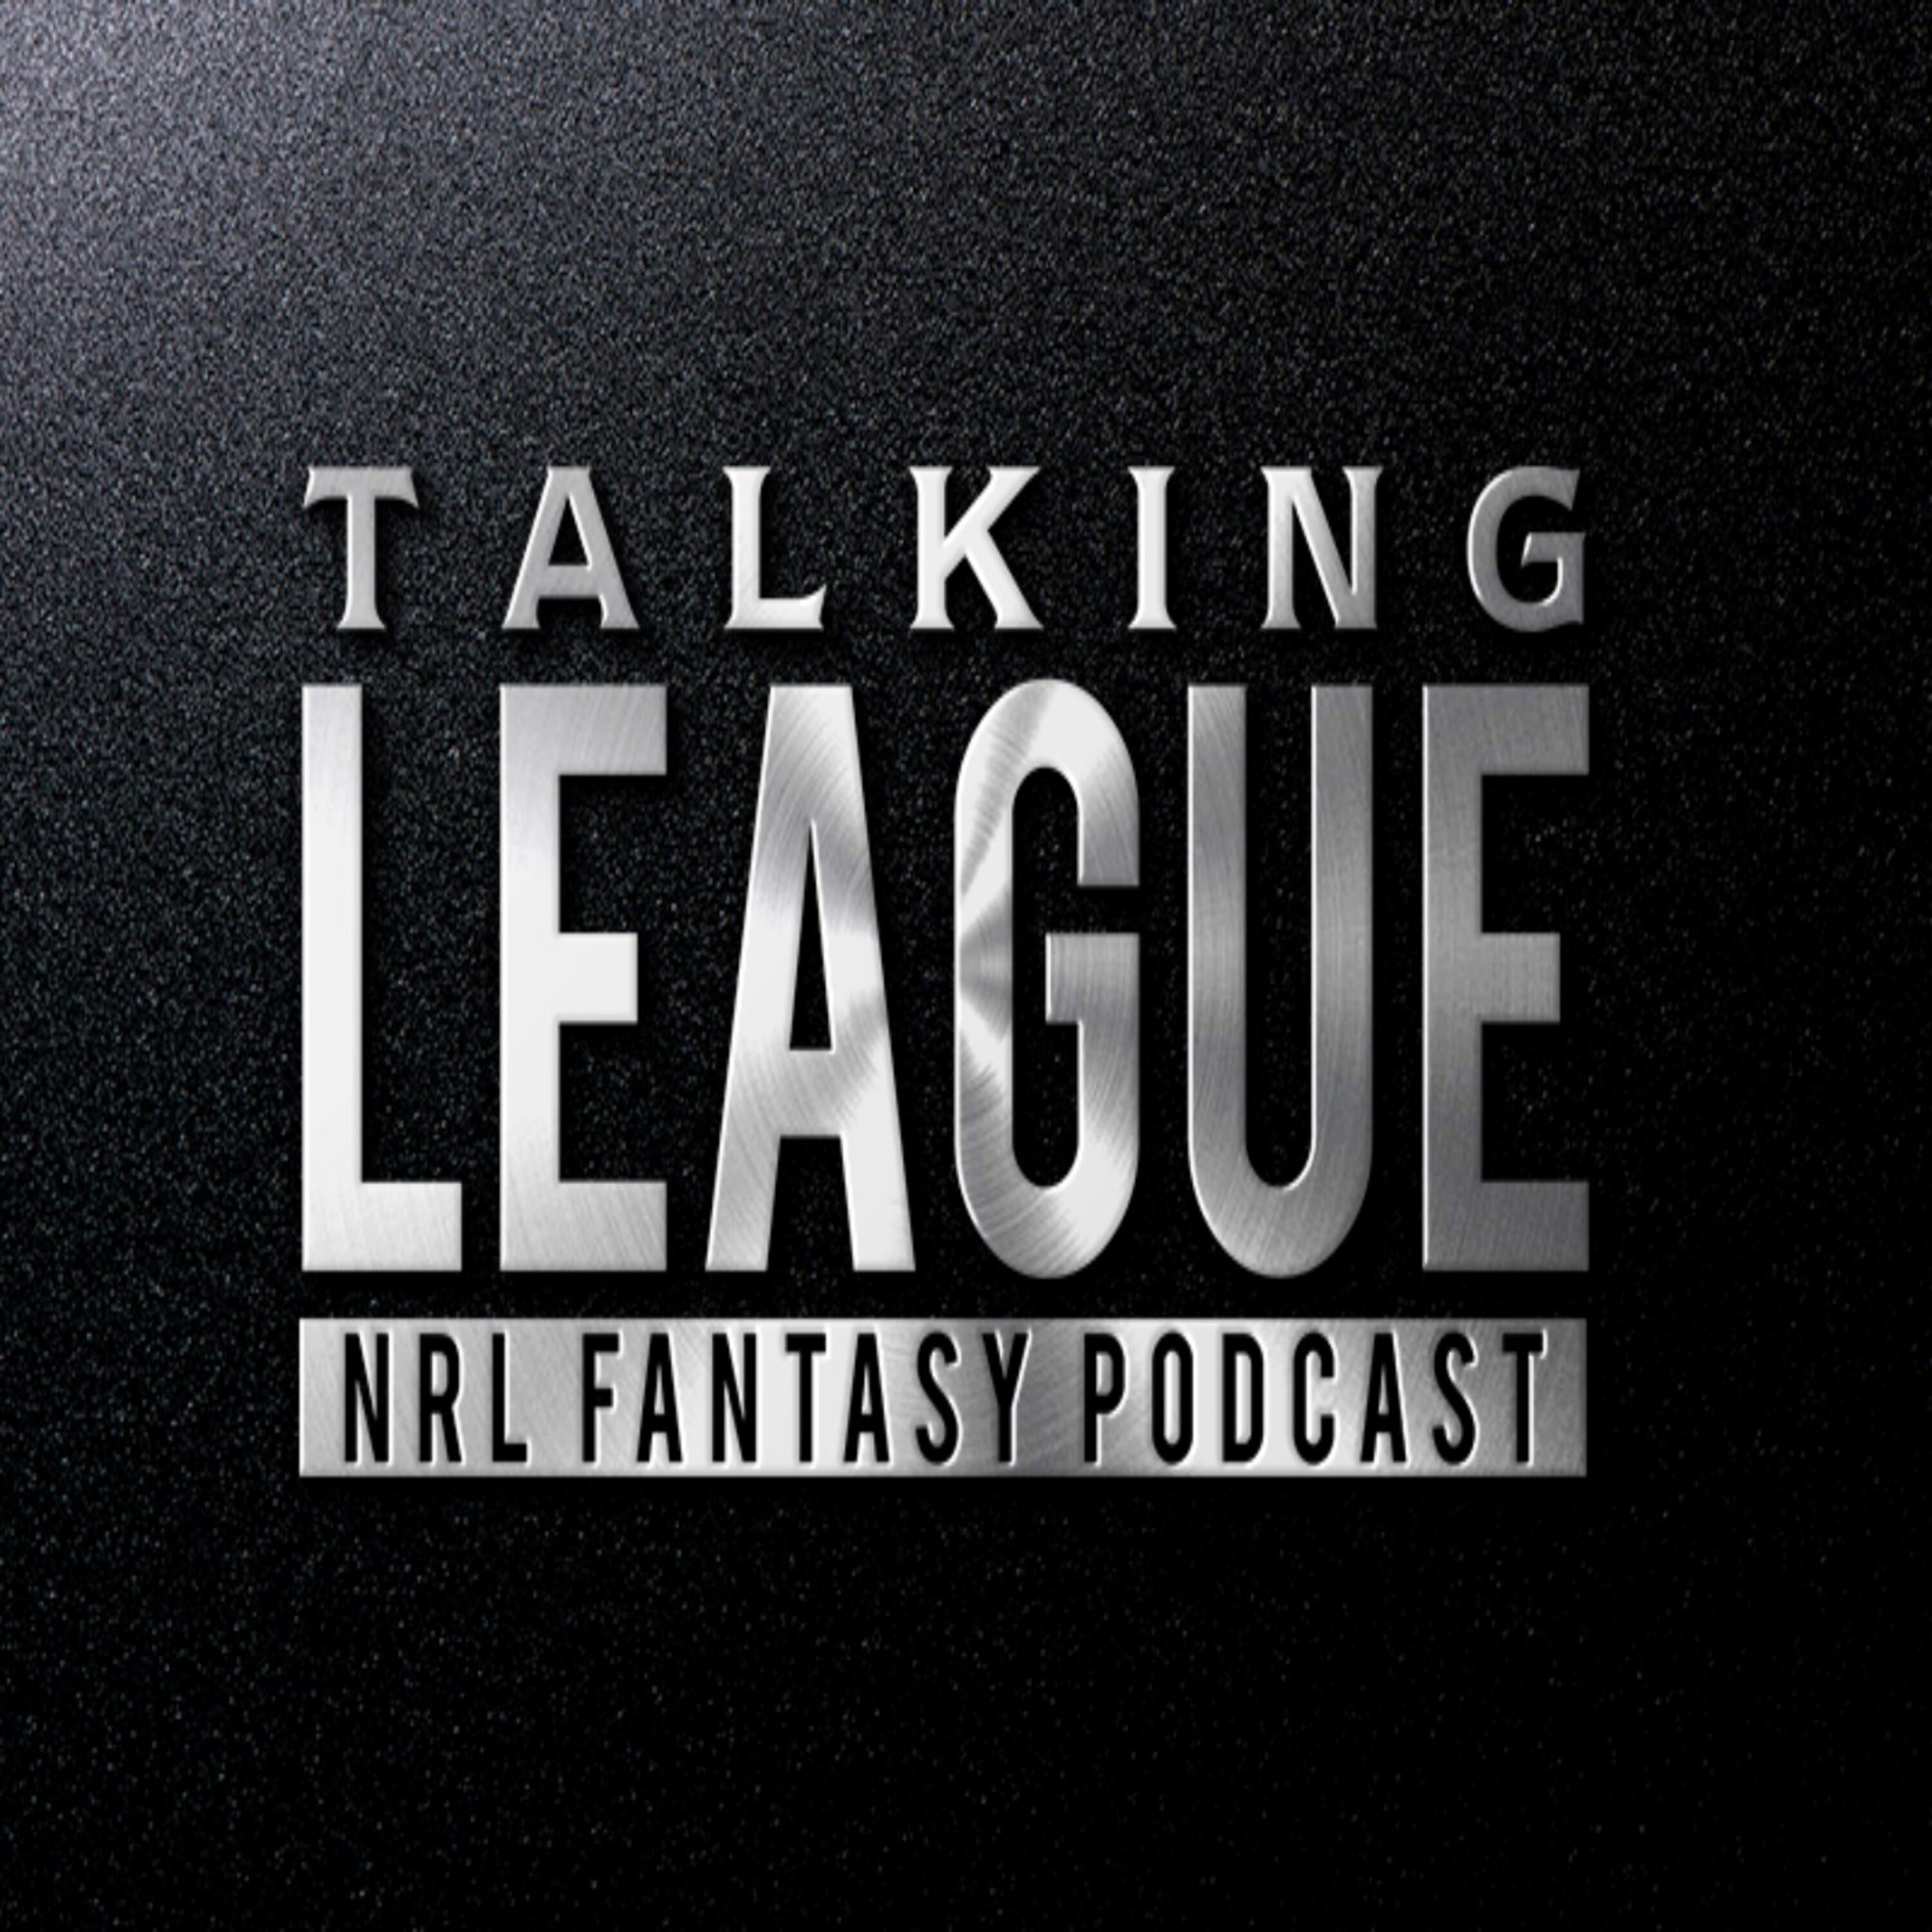 Team reveal with Jamie Brown from NRL Fantasy Analysis